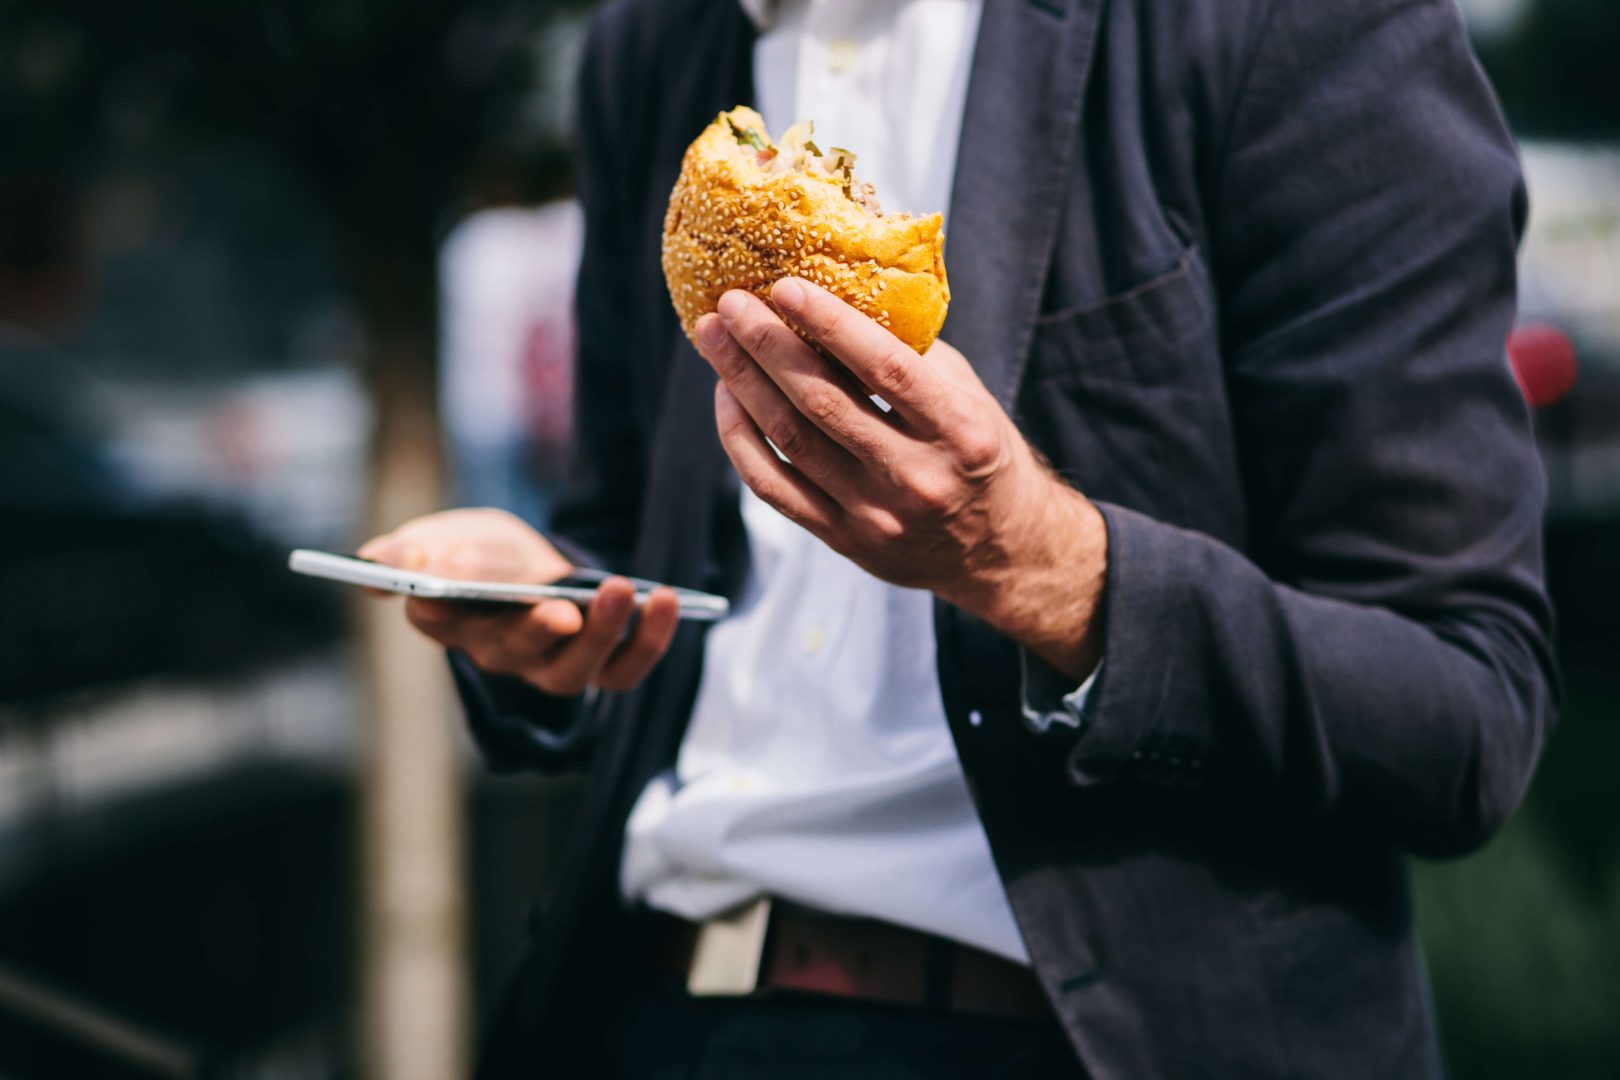 man with burger in one hand, phone in the other